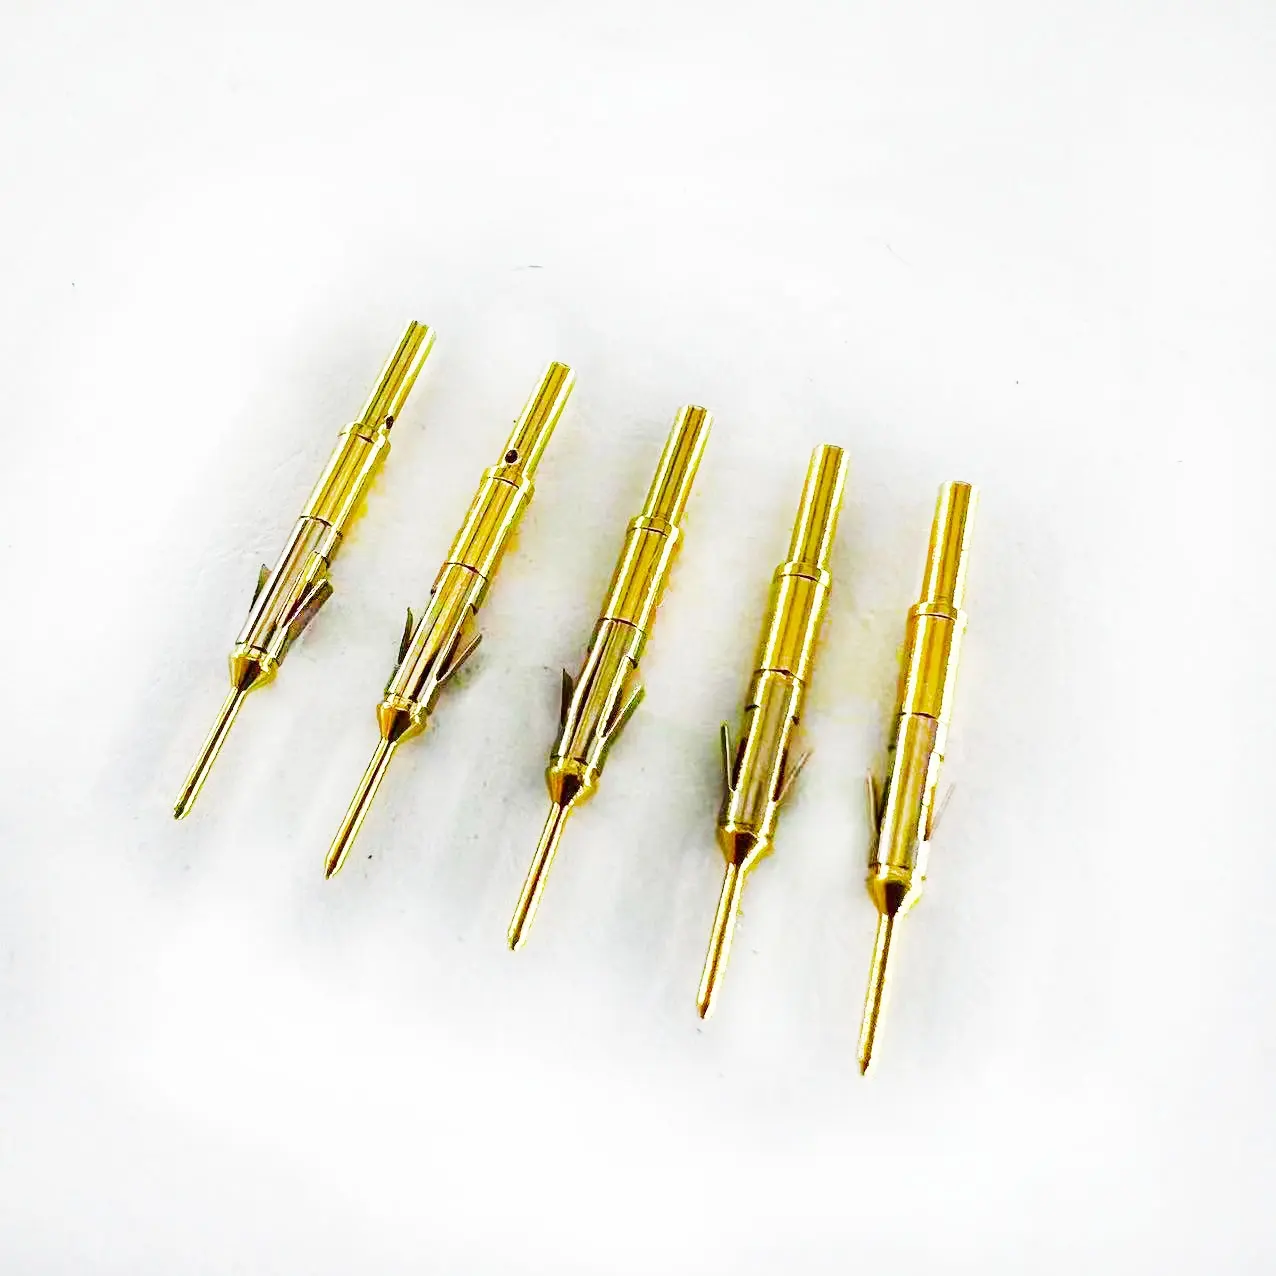 Manufacturers customize waterproof gold-plated connector pins, external claws, welding wire terminals, medical pins.